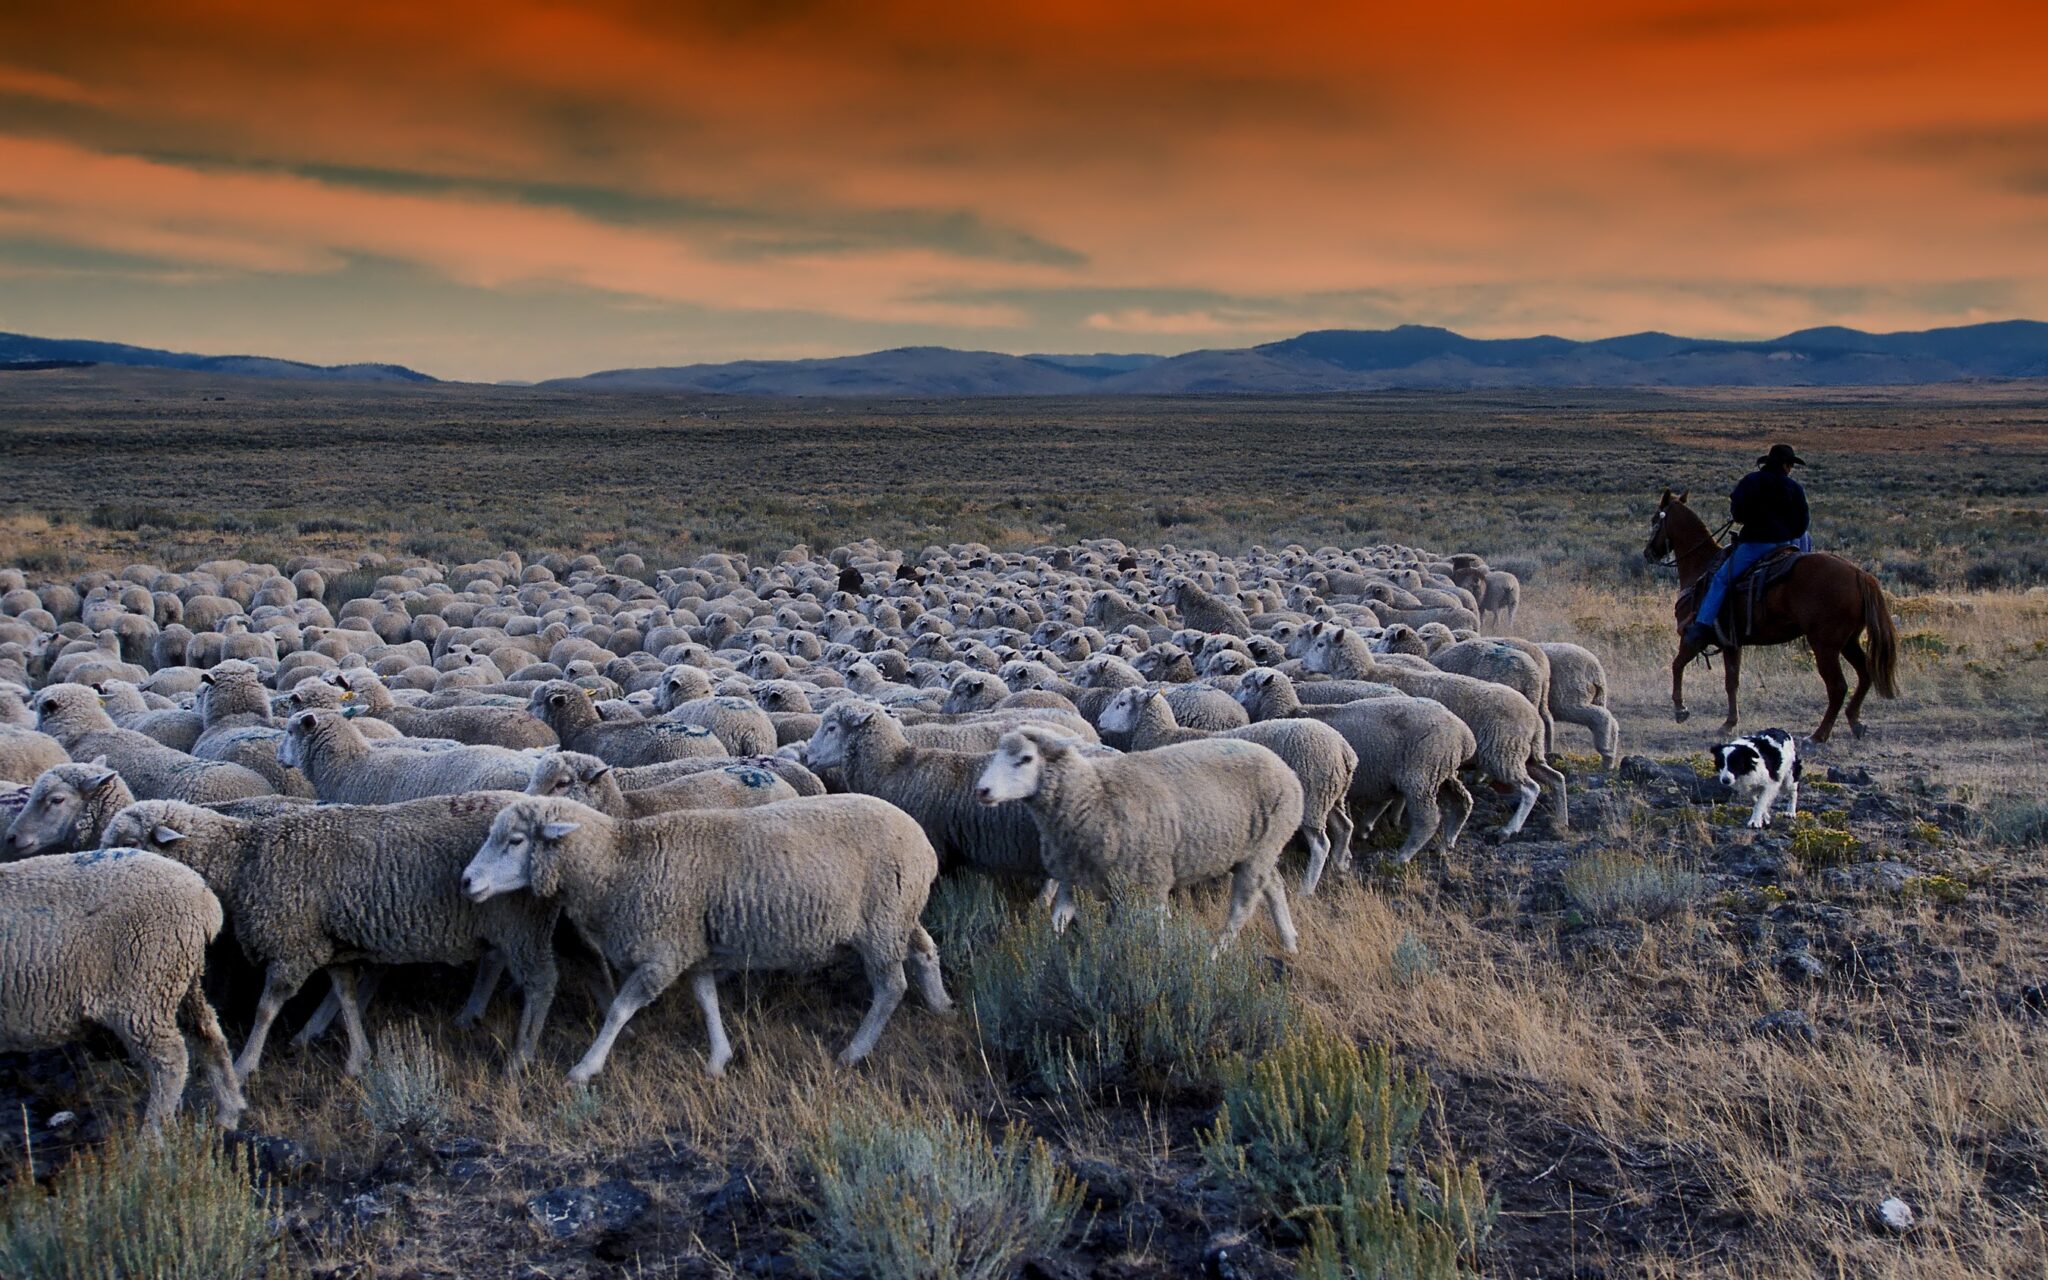 A dog helps move a herd of sheep in a specific direction. (photo by David Mark/Pixabay)